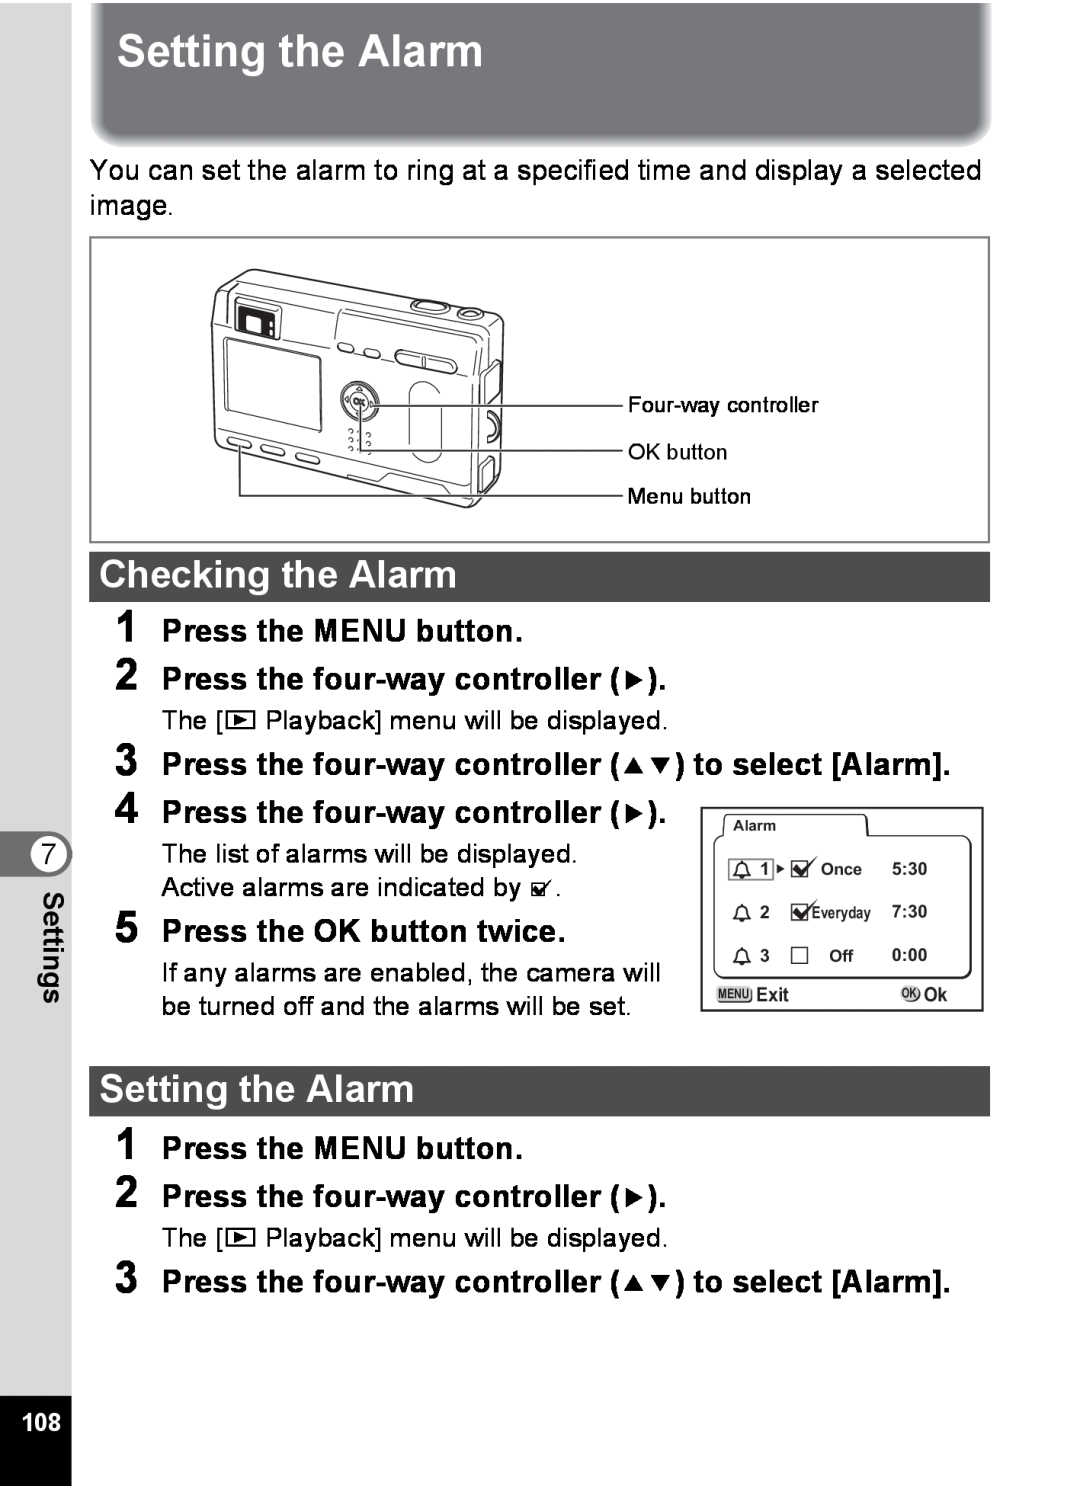 Pentax S4 manual Setting the Alarm, Checking the Alarm, Press the four-way controller 23 to select Alarm, Settings 